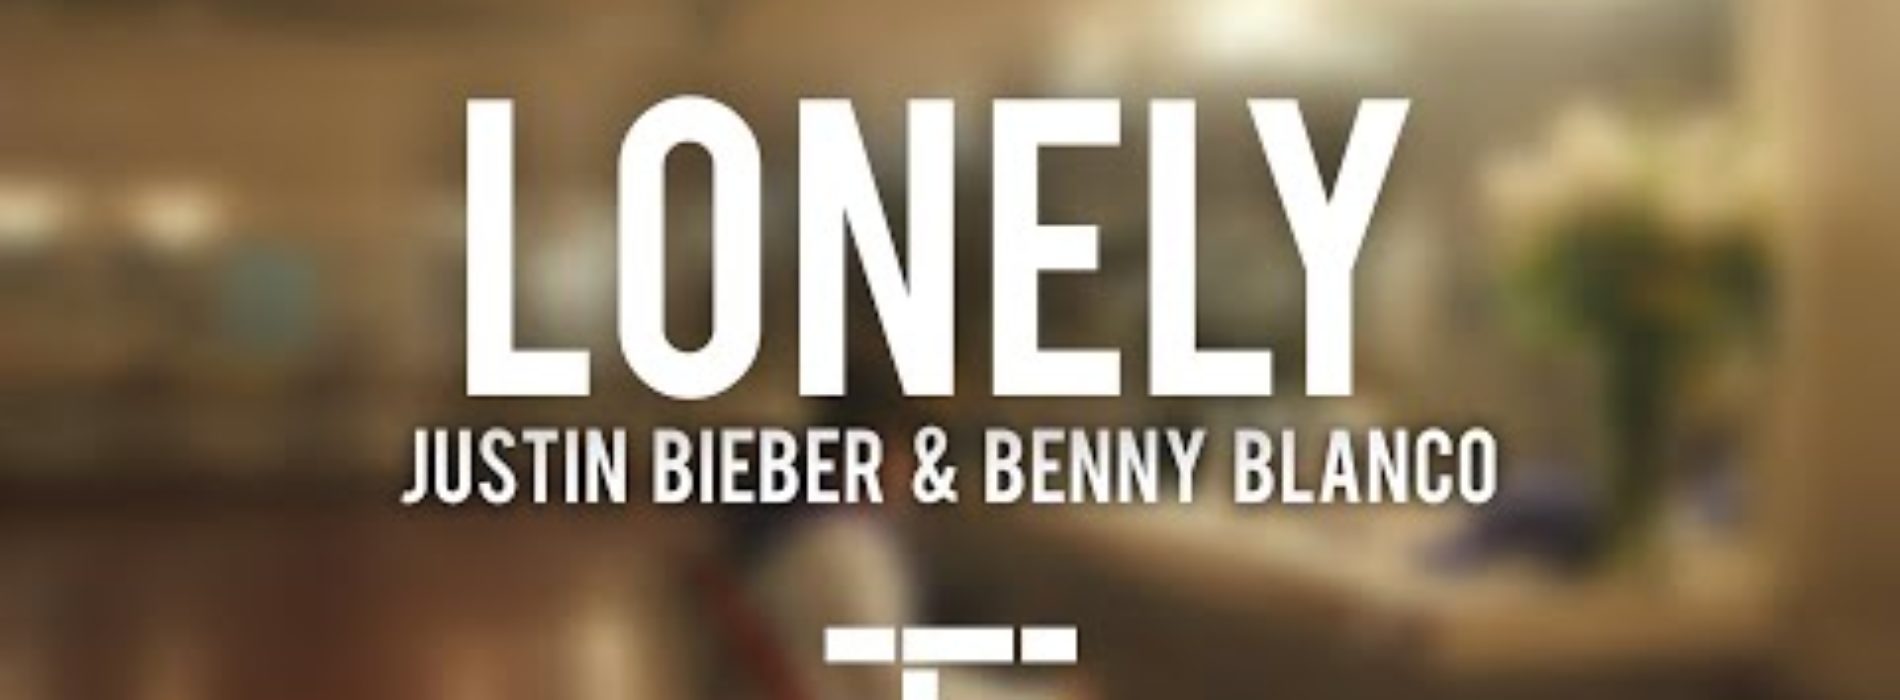 Justin Bieber & benny blanco – Lonely (Official Music Video) – Octobre 2020